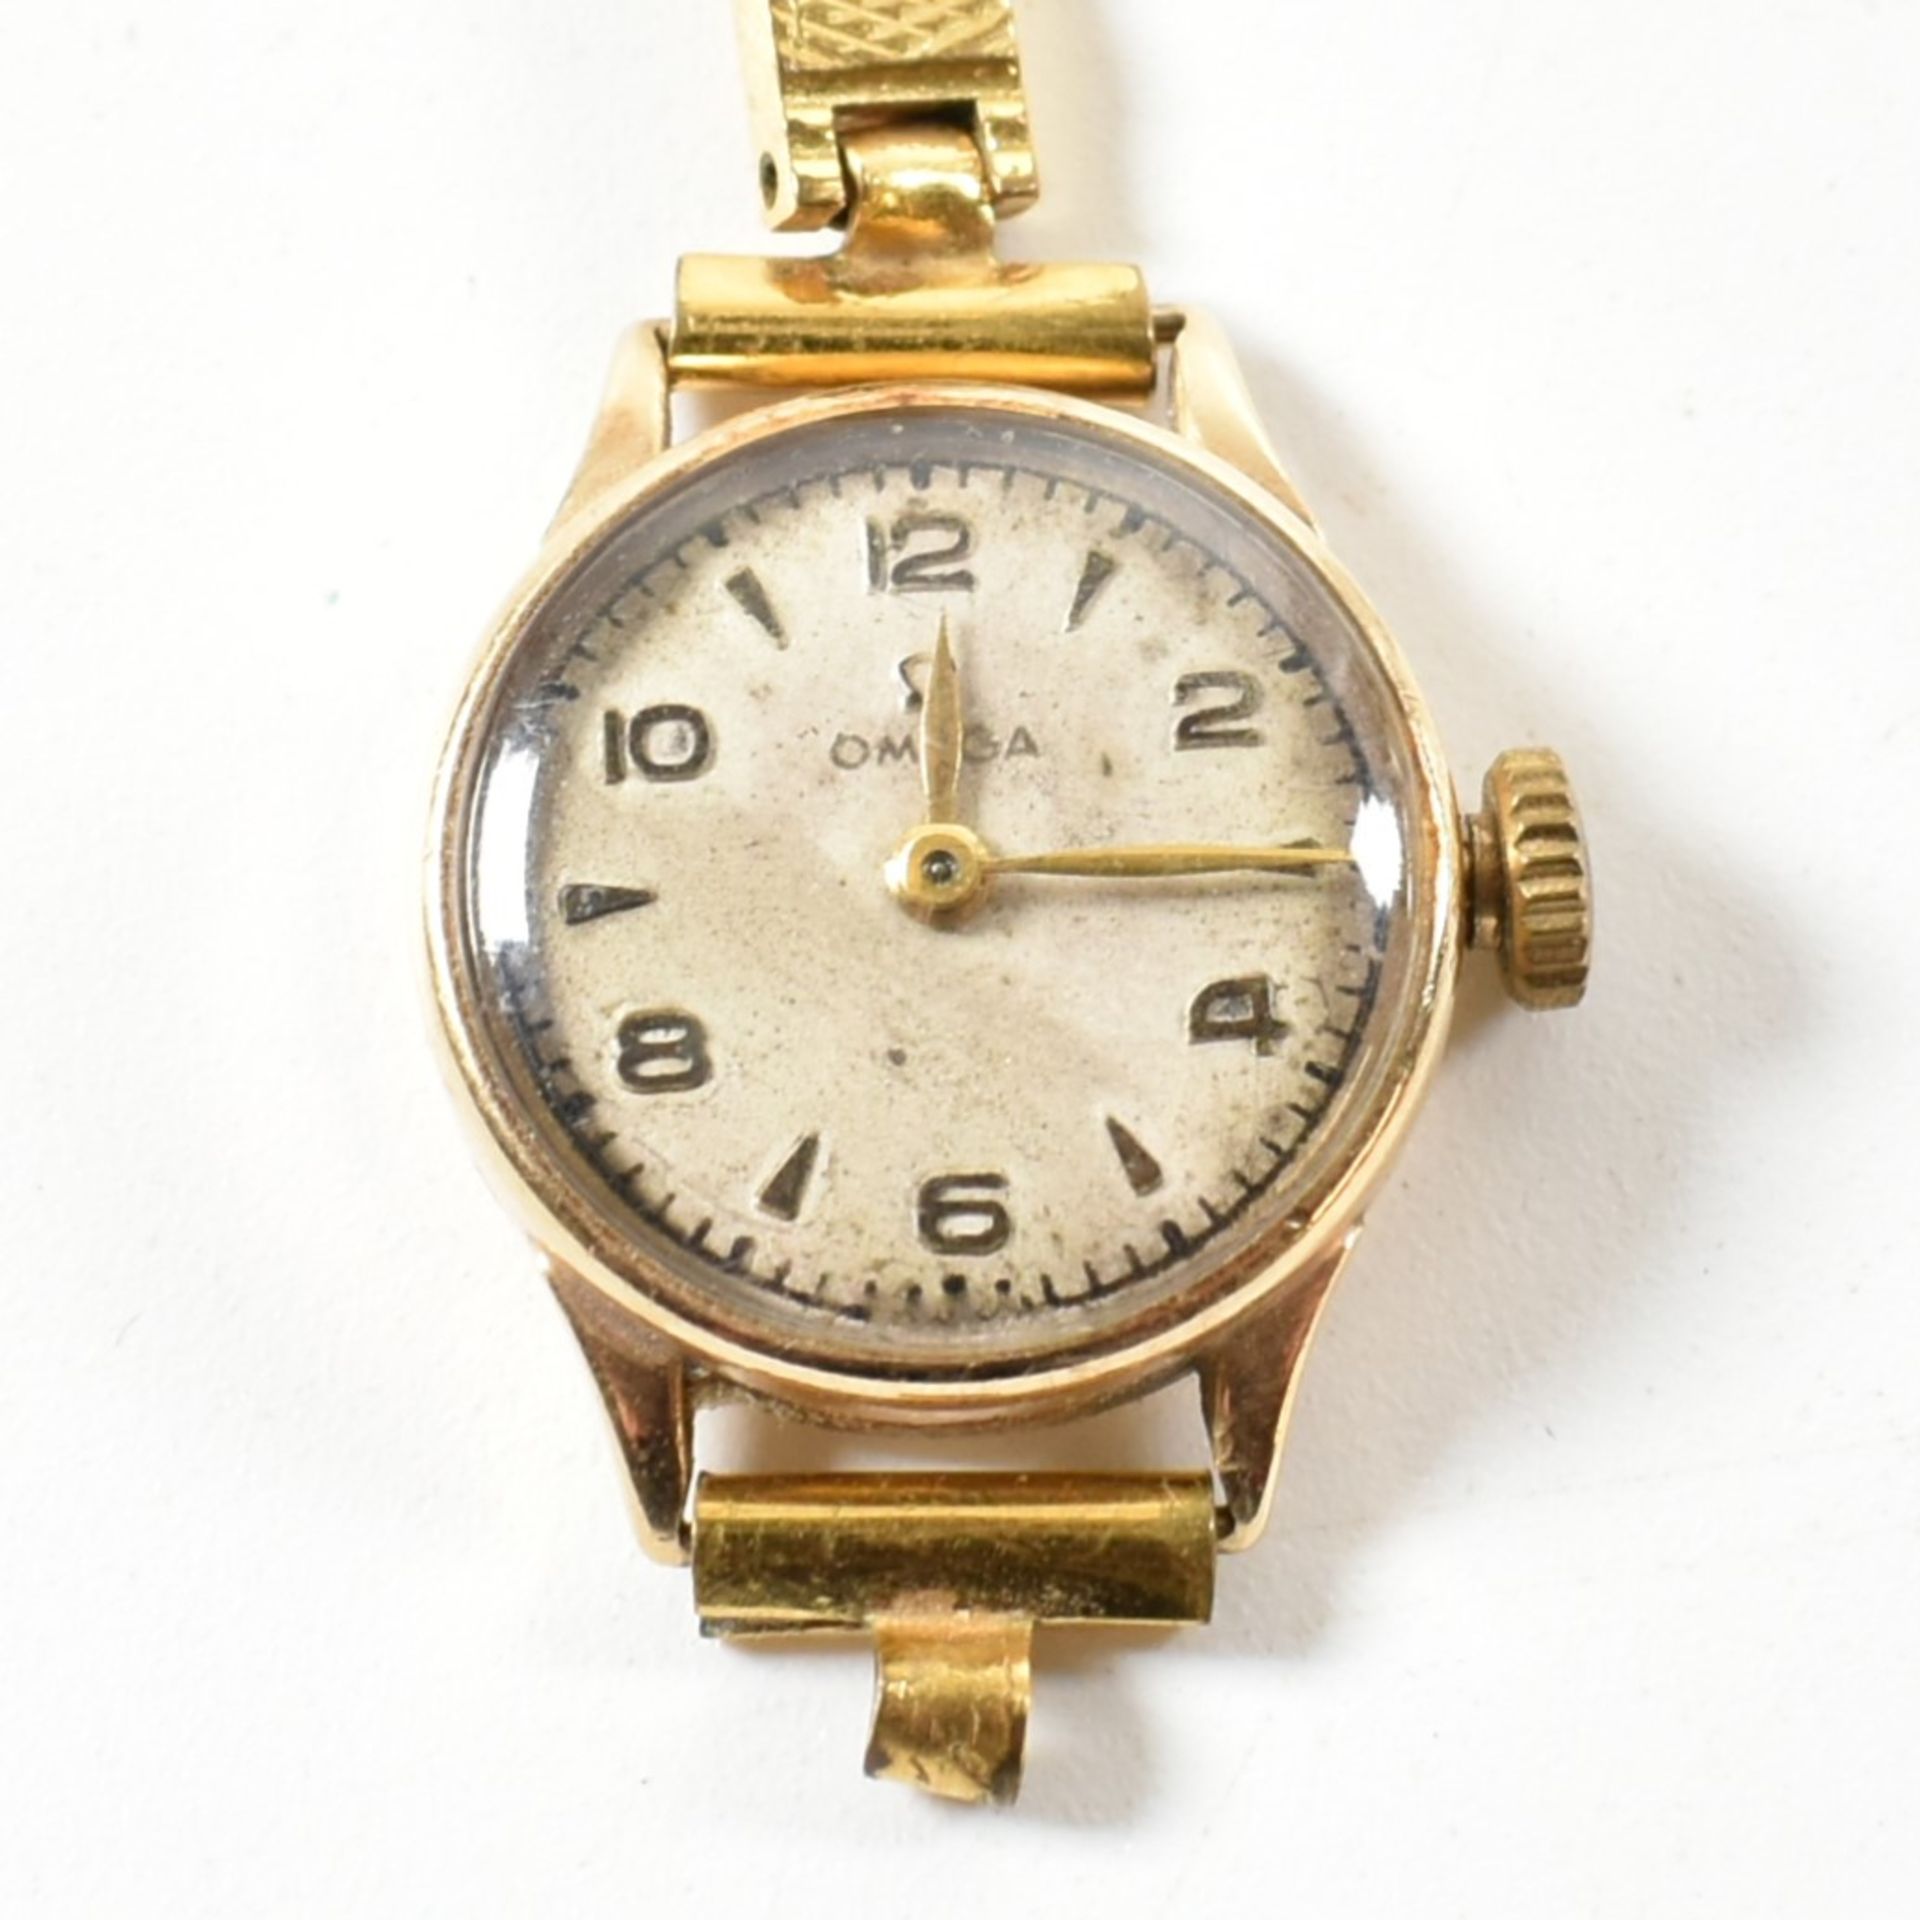 HALLMARKED 9CT GOLD OMEGA WATCH ON GILDED STRAP